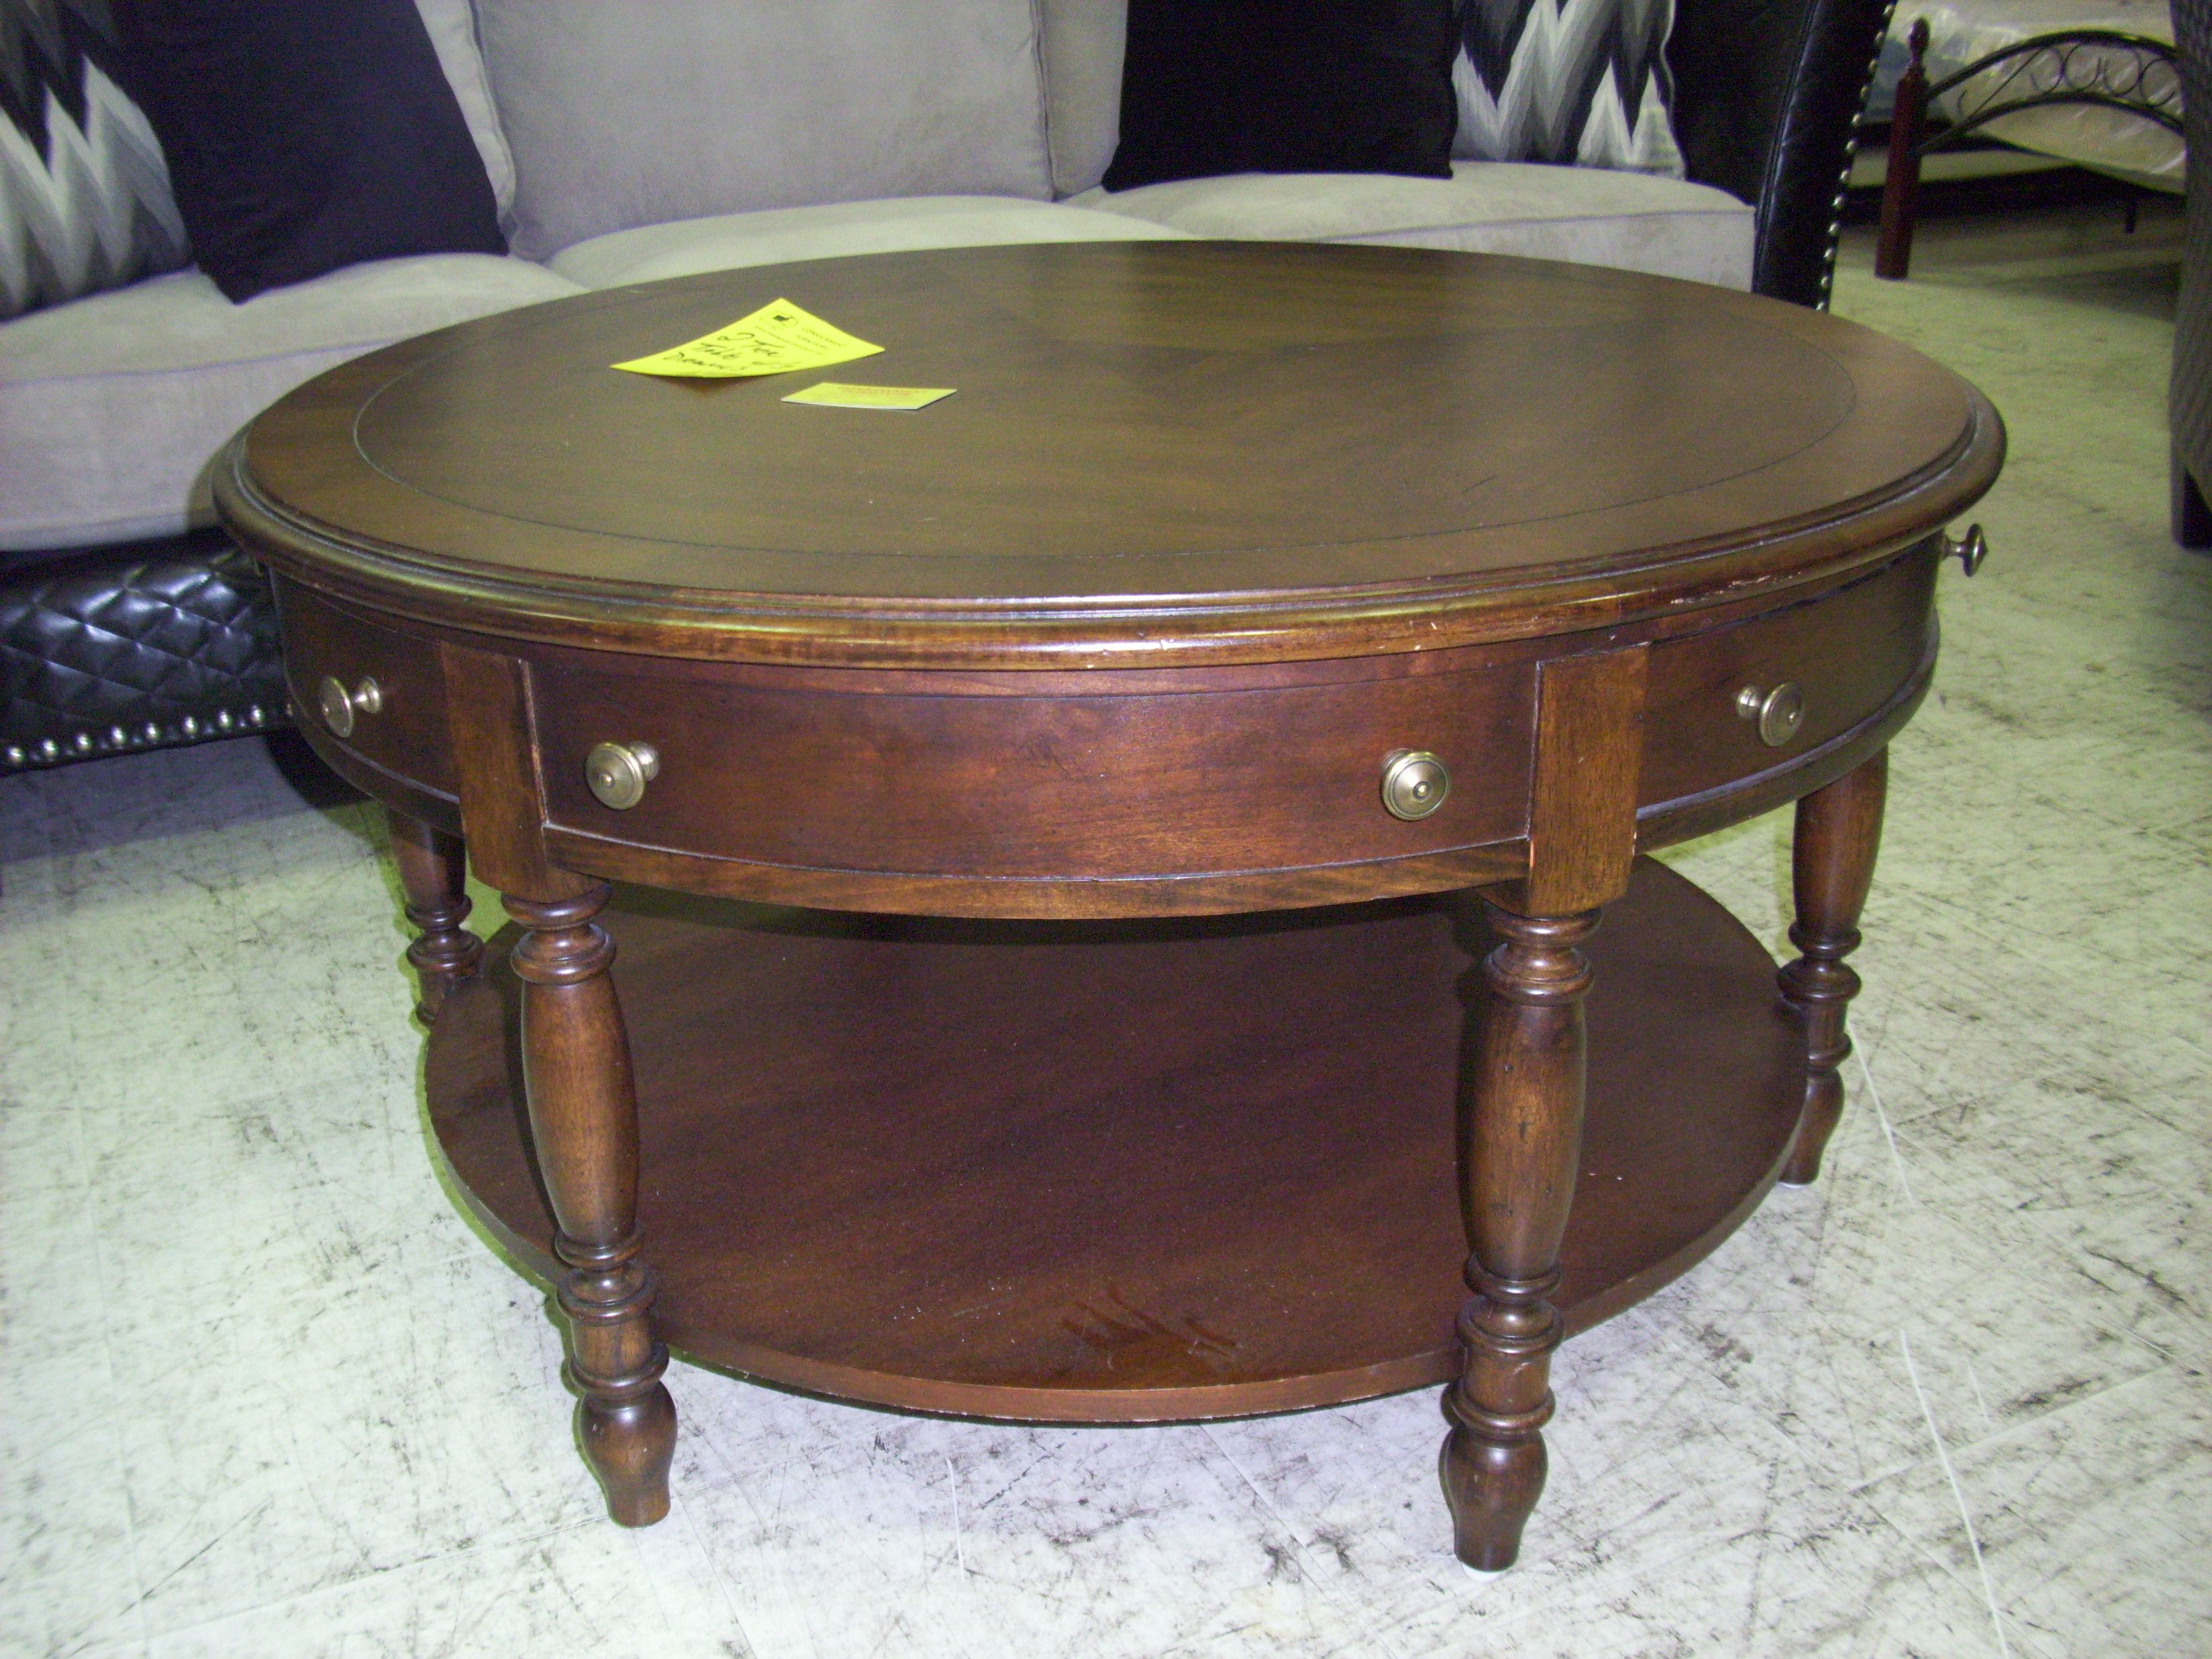 Round Coffee Table With Drawer Winsome Wood Concord Round Coffee Table With One Storage Shelf And Drawer Finish (View 8 of 10)